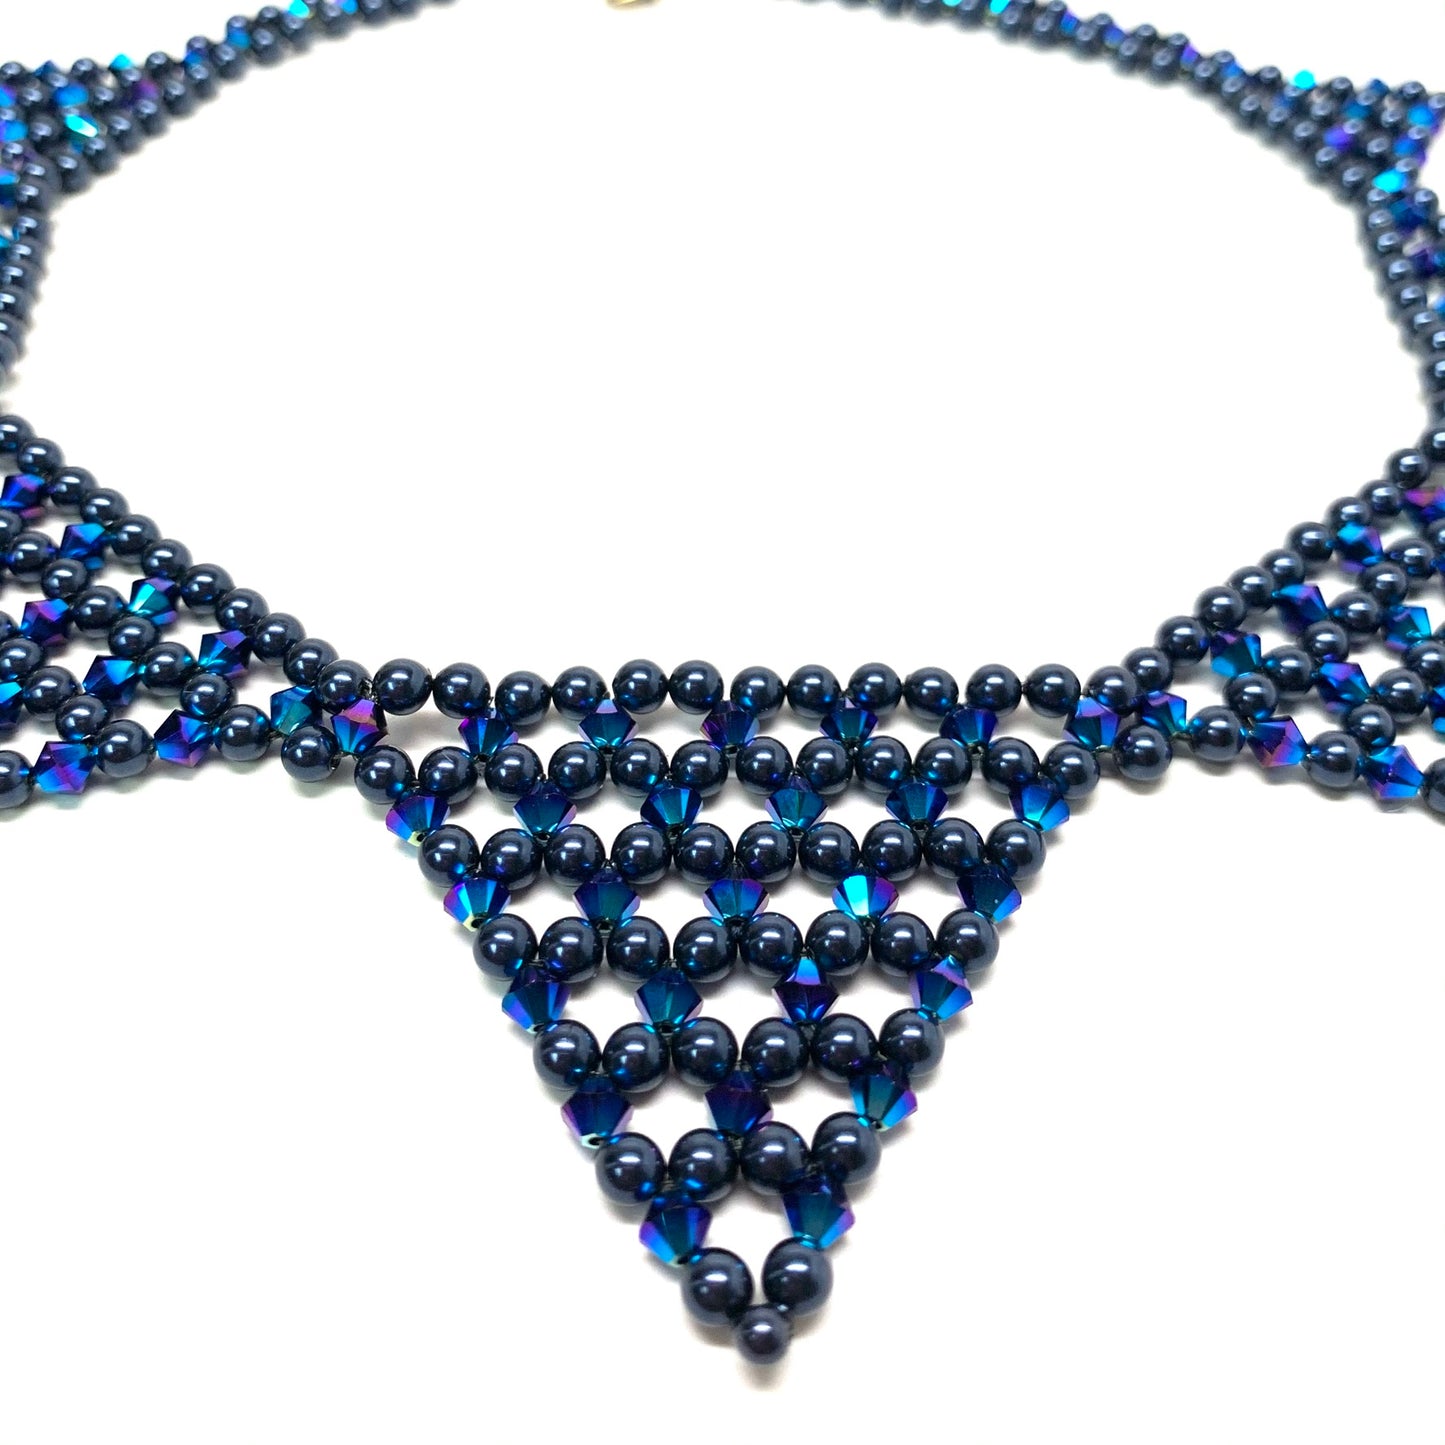 Triangles Necklace - Night Blue Pearl